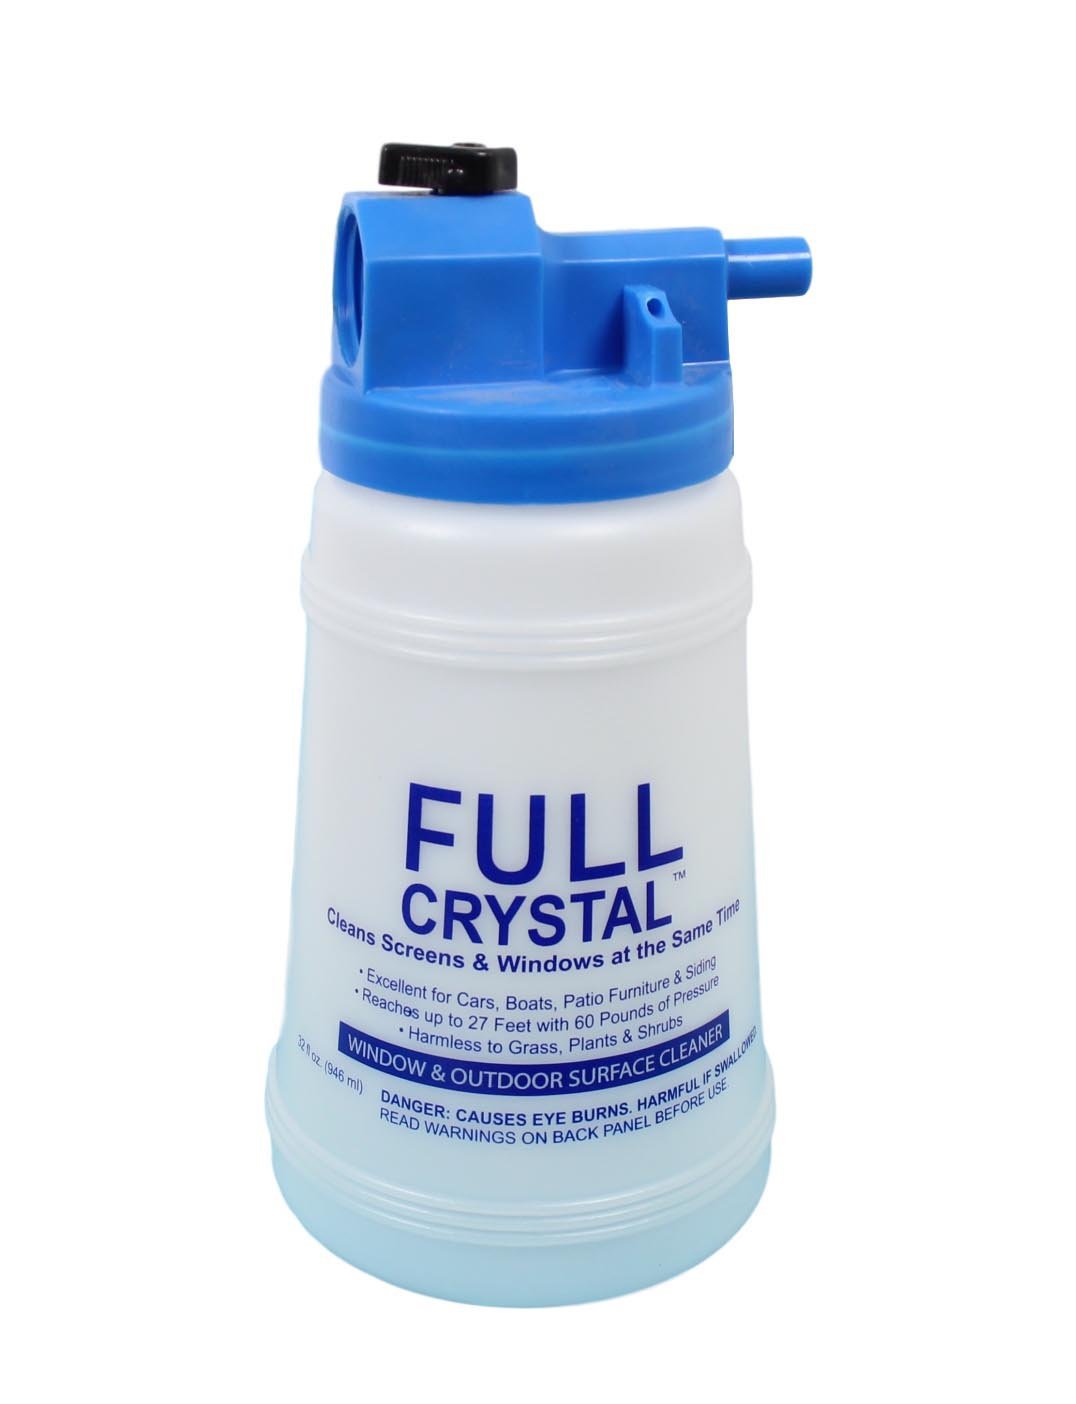 Full Crystal Window And Outdoor Surface Cleaner Glass Cleaner Window Car Cleaning Tools 5507 (Parcel Rate)